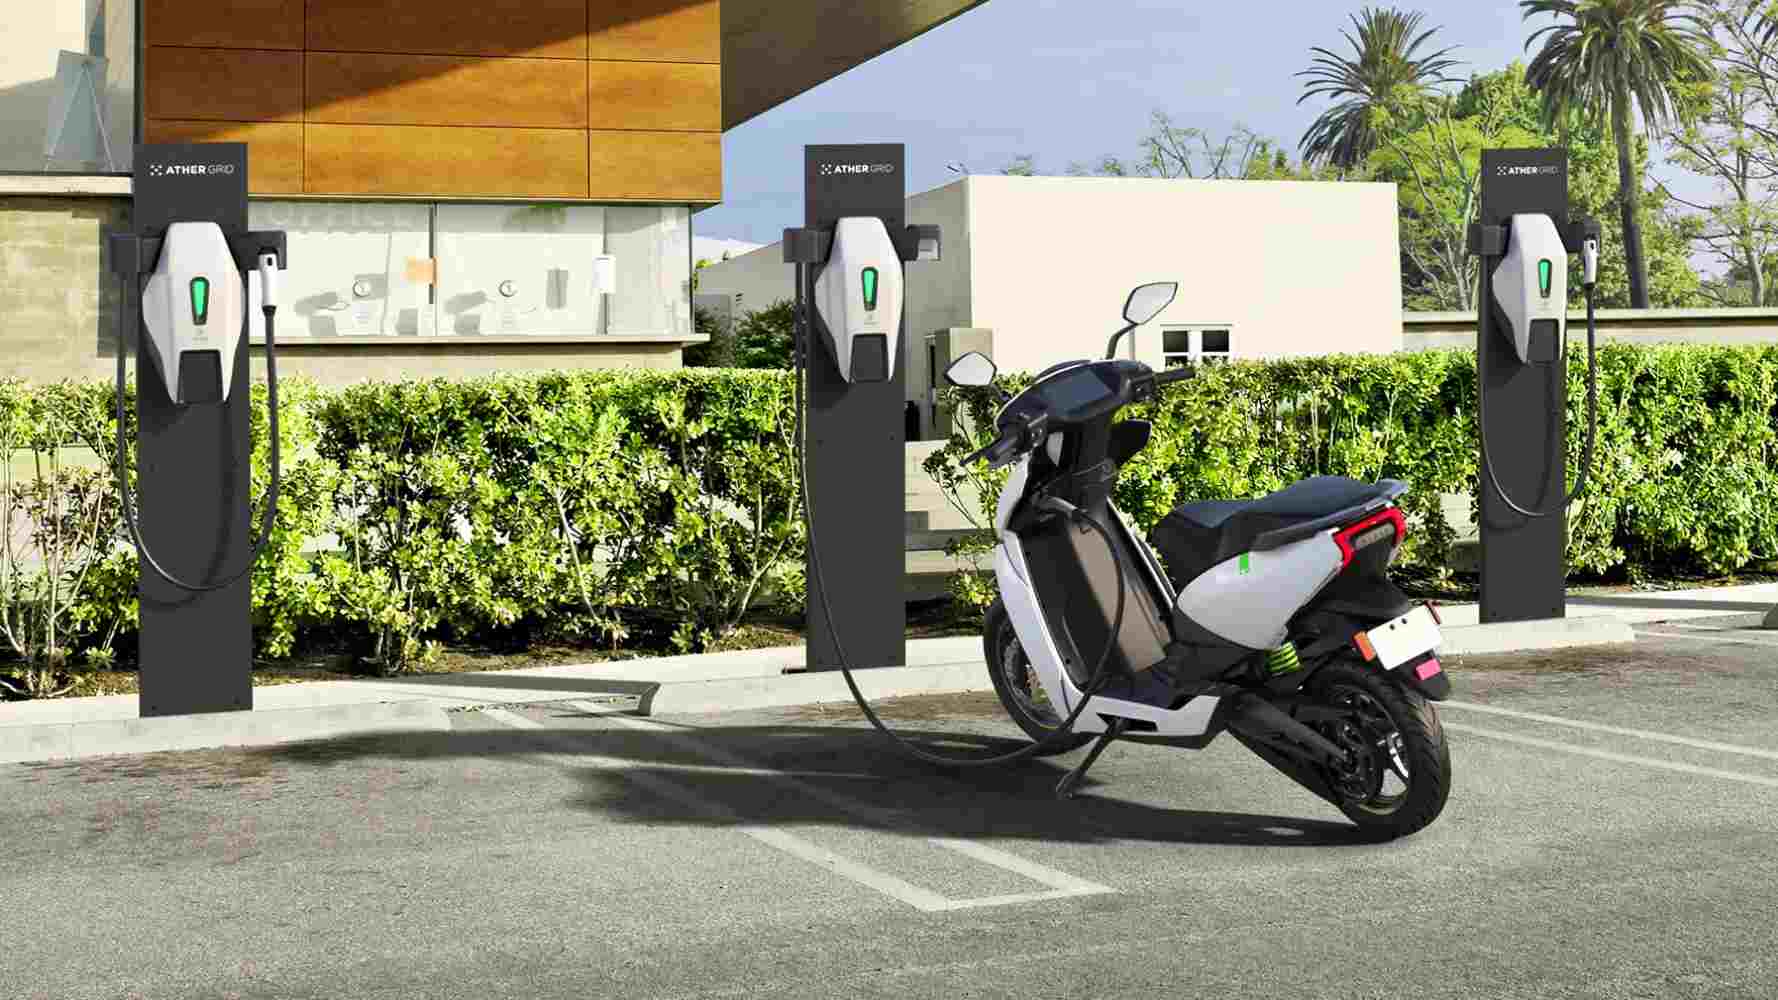 Ather Energy is targeting installation of 500 fast-charging points across India by April 2022. Image: Ather Energy